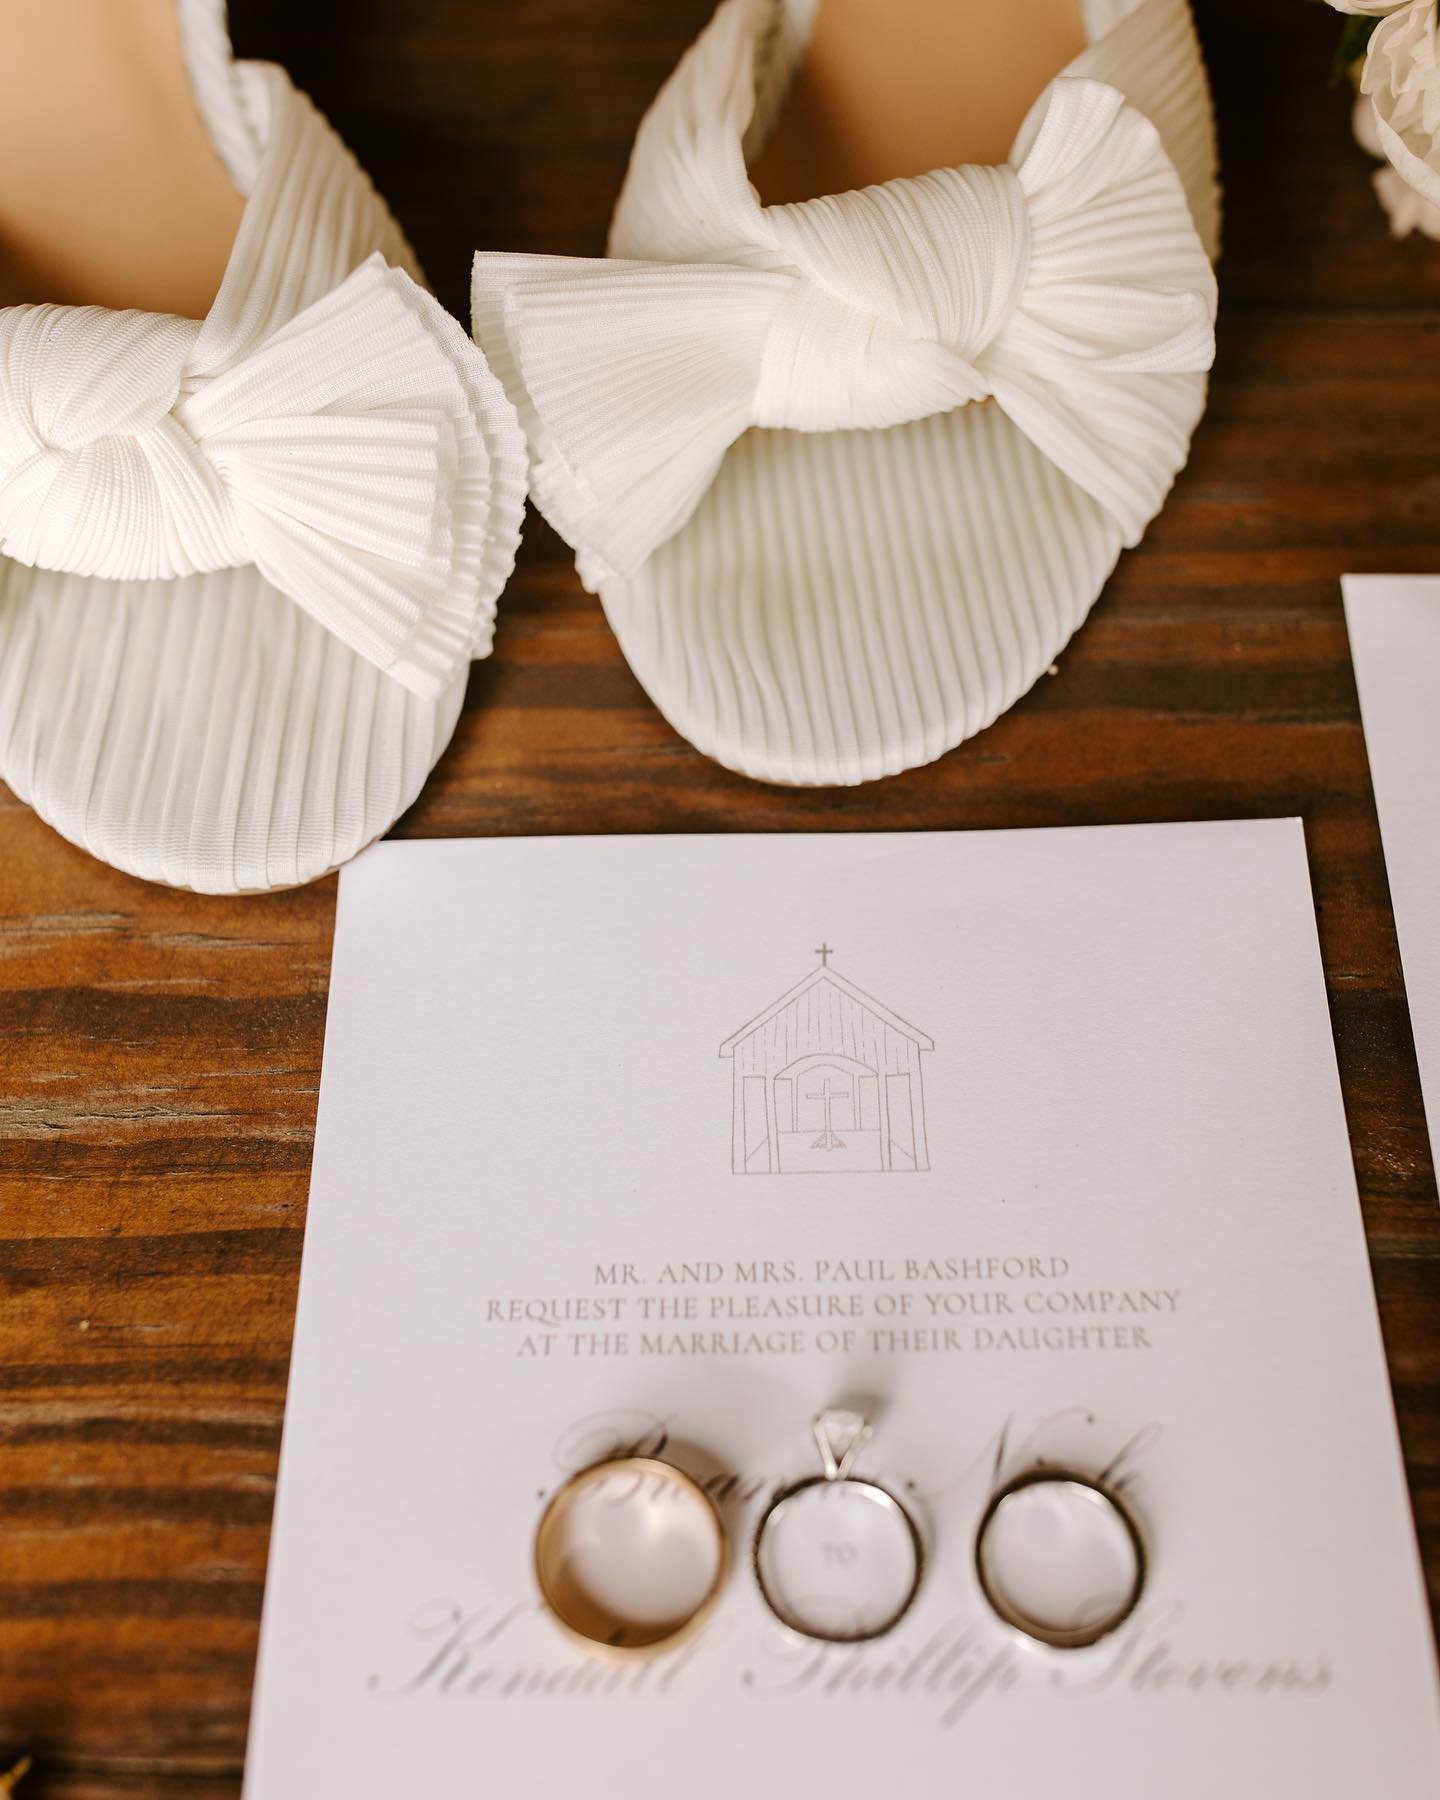 In honor of our co-founder&rsquo;s one year anniversary&hellip; here are some stationery pictures from Bre &amp; Kendall&rsquo;s wedding day! Fun fact: Maddie was Bre&rsquo;s maid of honor and helped DIY her wedding invitations and day-of stationery,